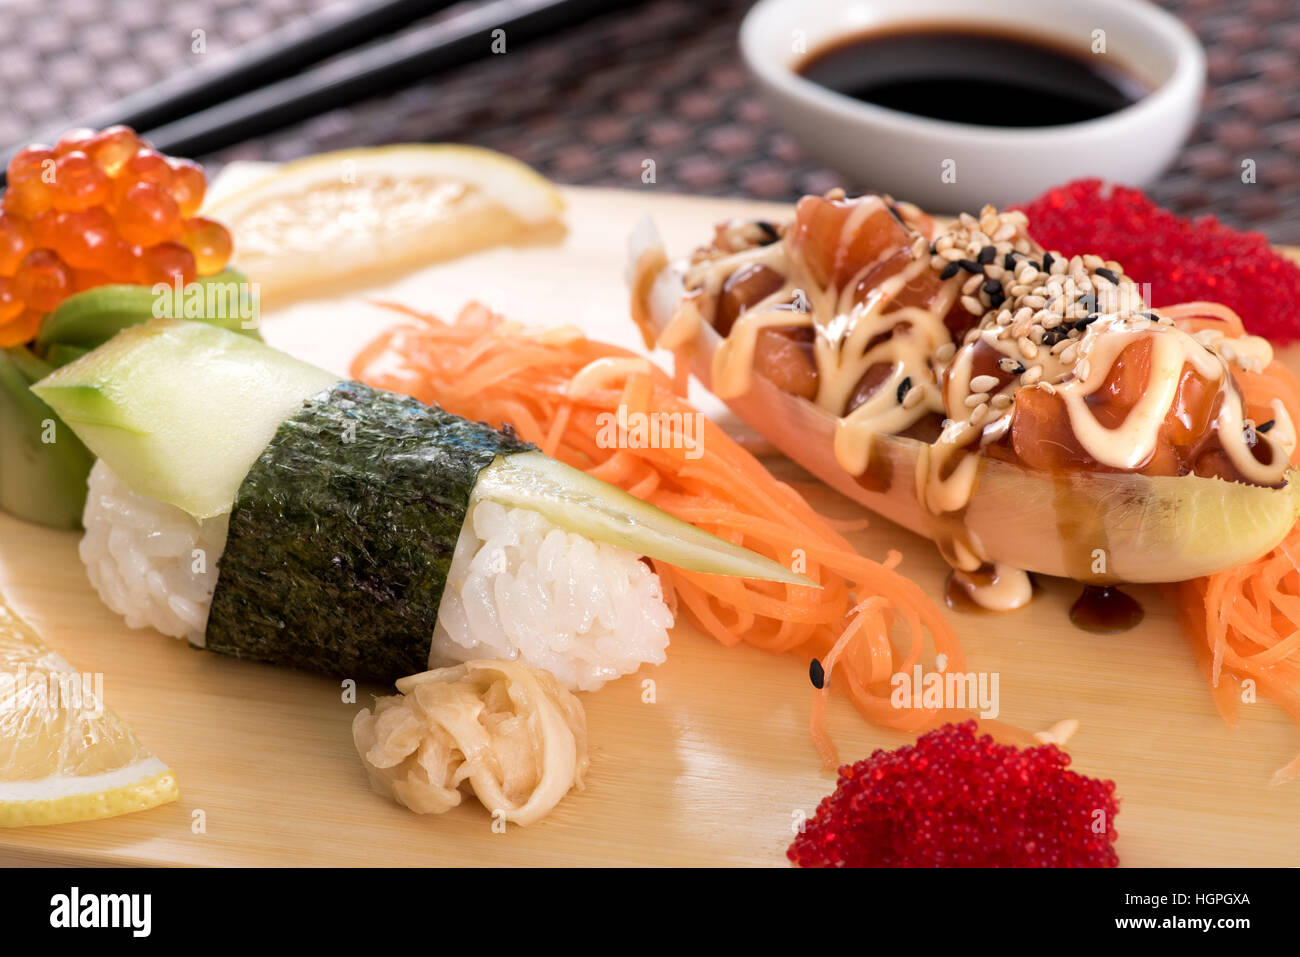 Japanese cuisine sushi set with salmon fish served with tartar sauce on wooden board, close up view Stock Photo